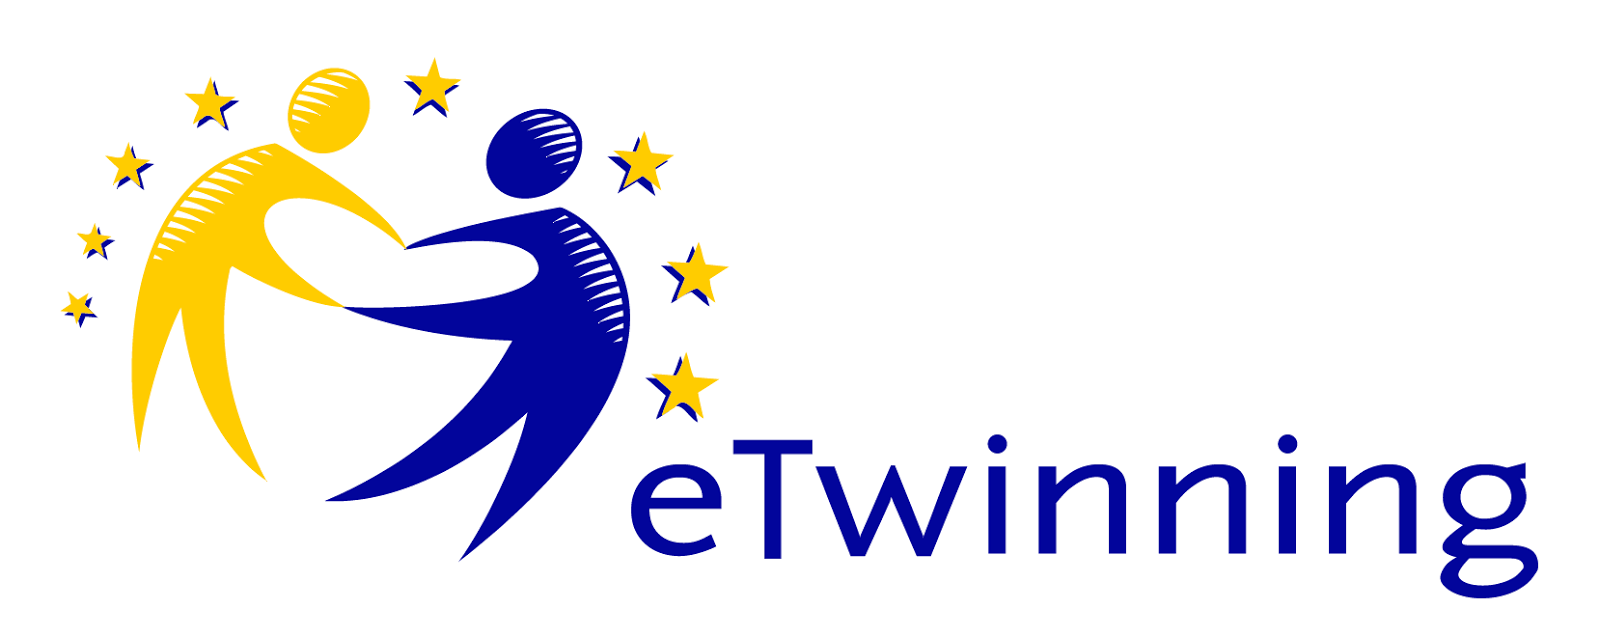 This a eTwinning project